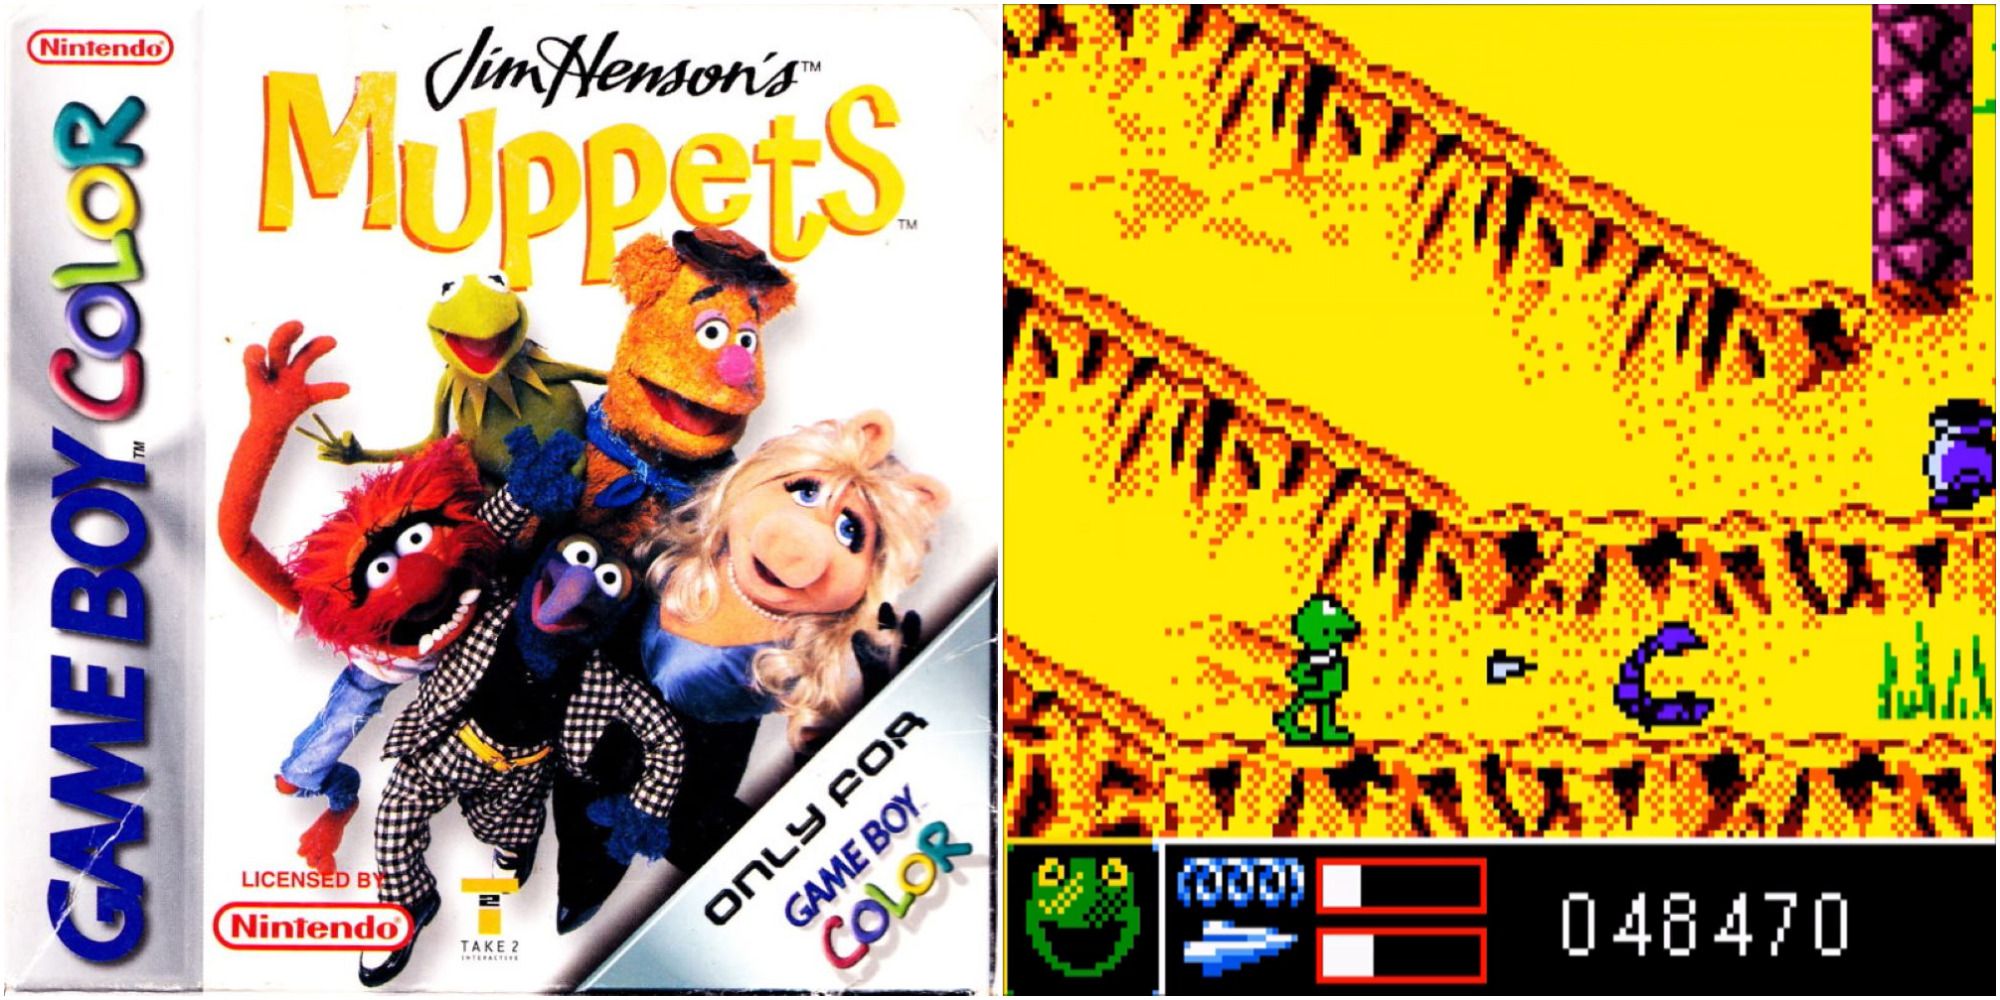 Split image Muppets Game Boy Color Cover featuring Kermit the frog, Animal, Fozzie Bear, Gonzo, and Miss Piggy and gameplay of Kermit in Ancient Egypt